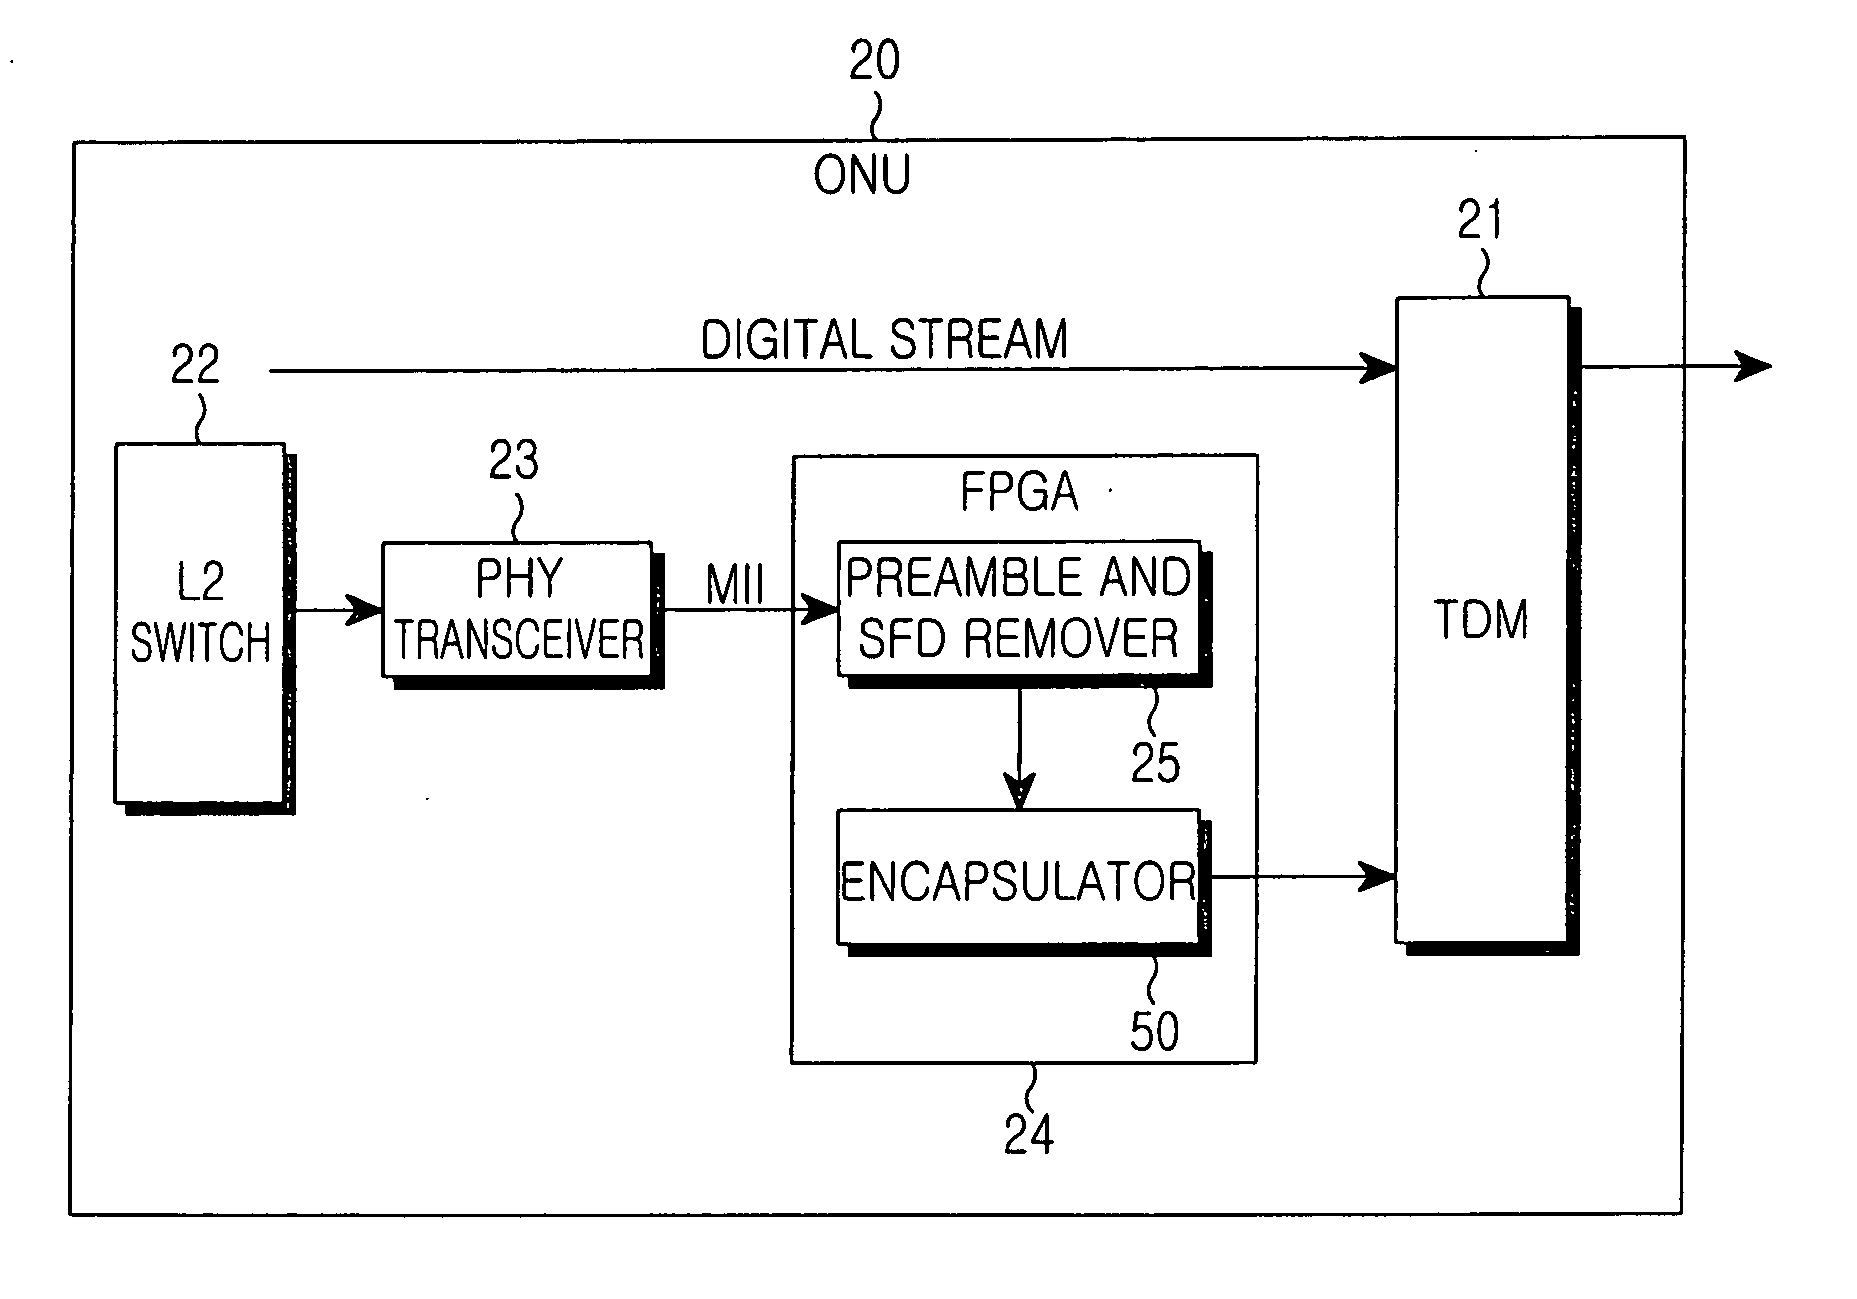 Method for transmitting and receiving ethernet data in system based on broadcast/communication convergence